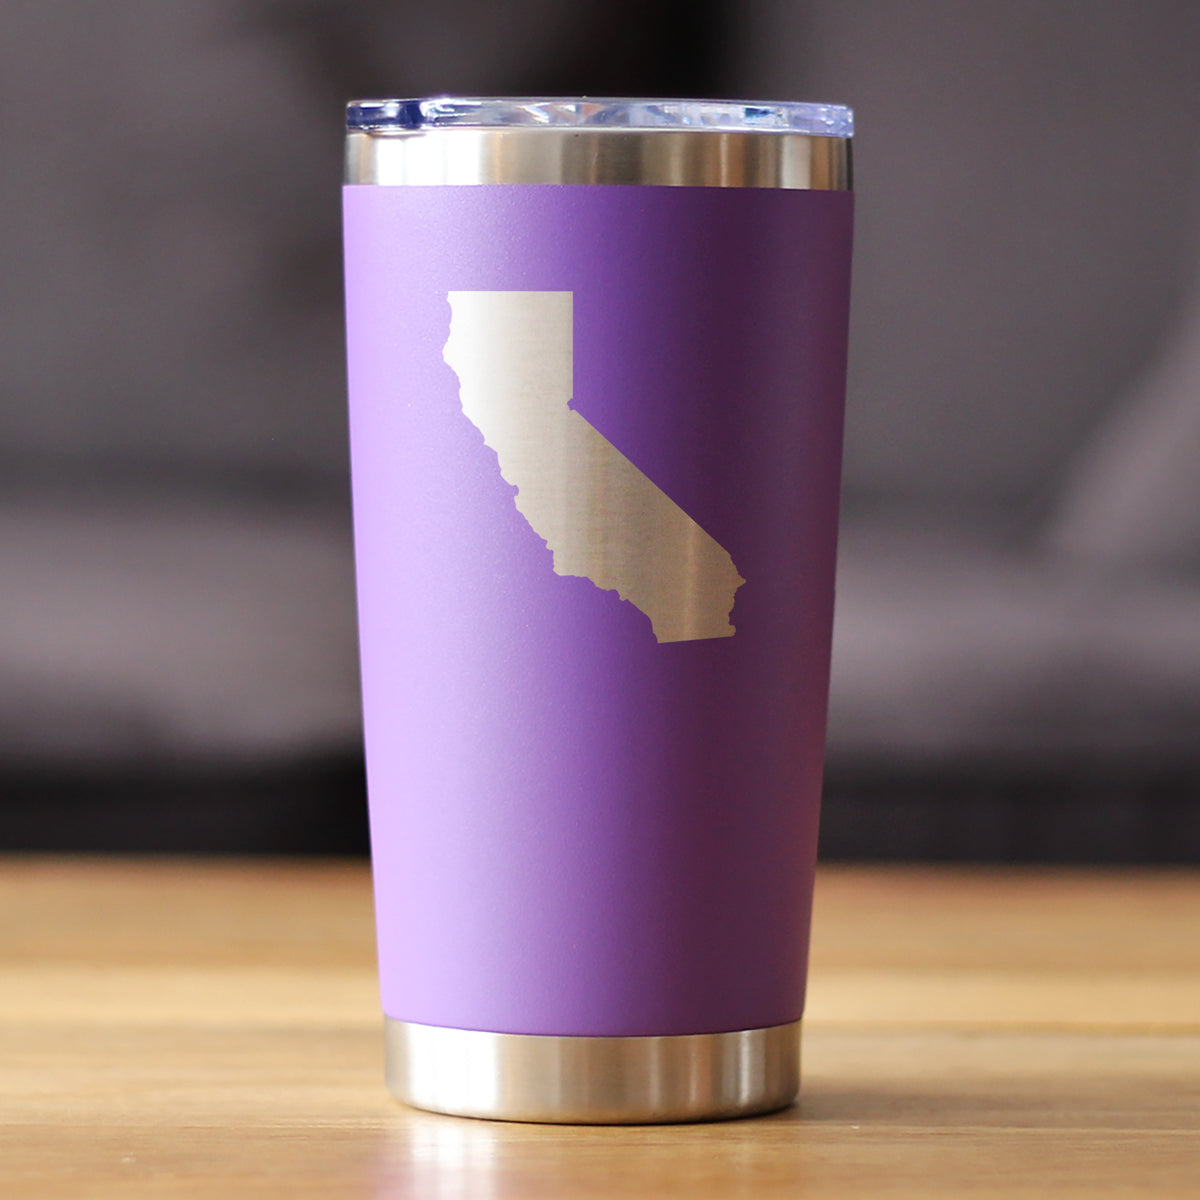 California State Outline - Insulated Coffee Tumbler Cup with Sliding Lid - Stainless Steel Travel Mug - California Gifts for Women and Men Californians